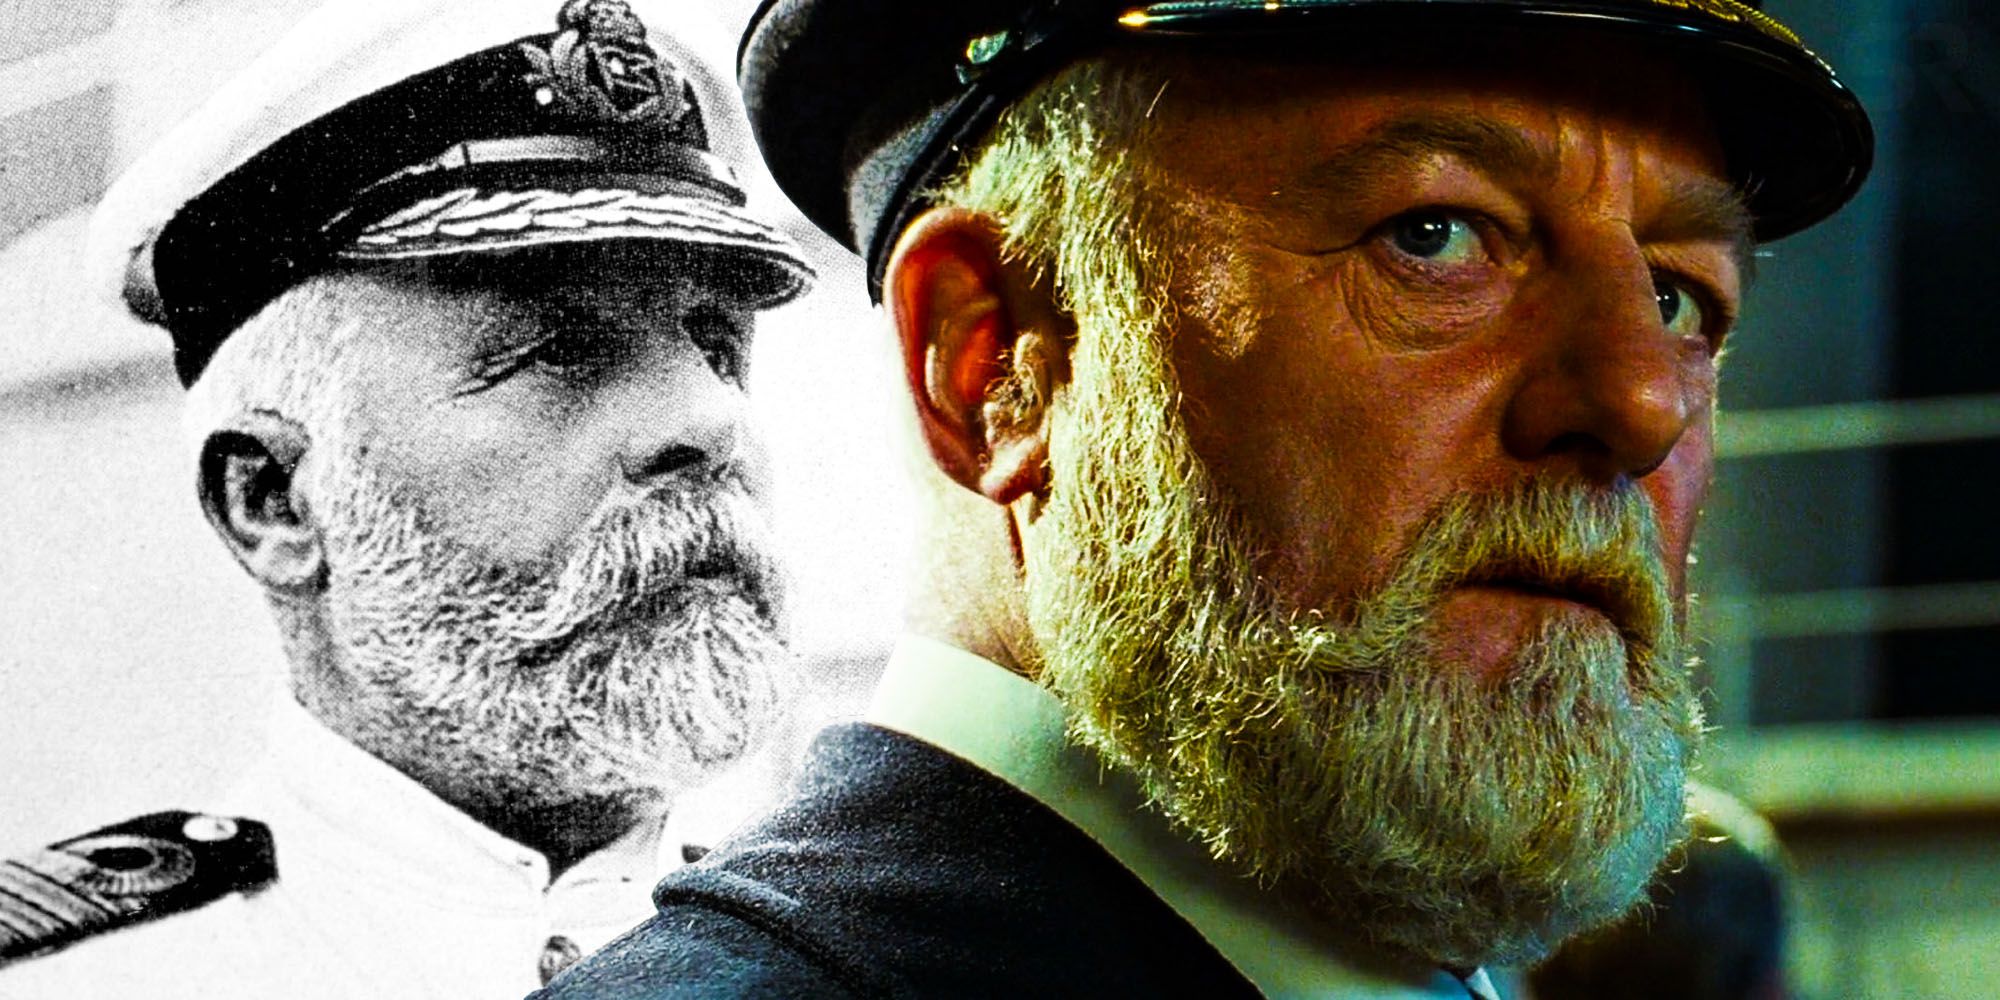 Who Was the Capitan of the Titanic?